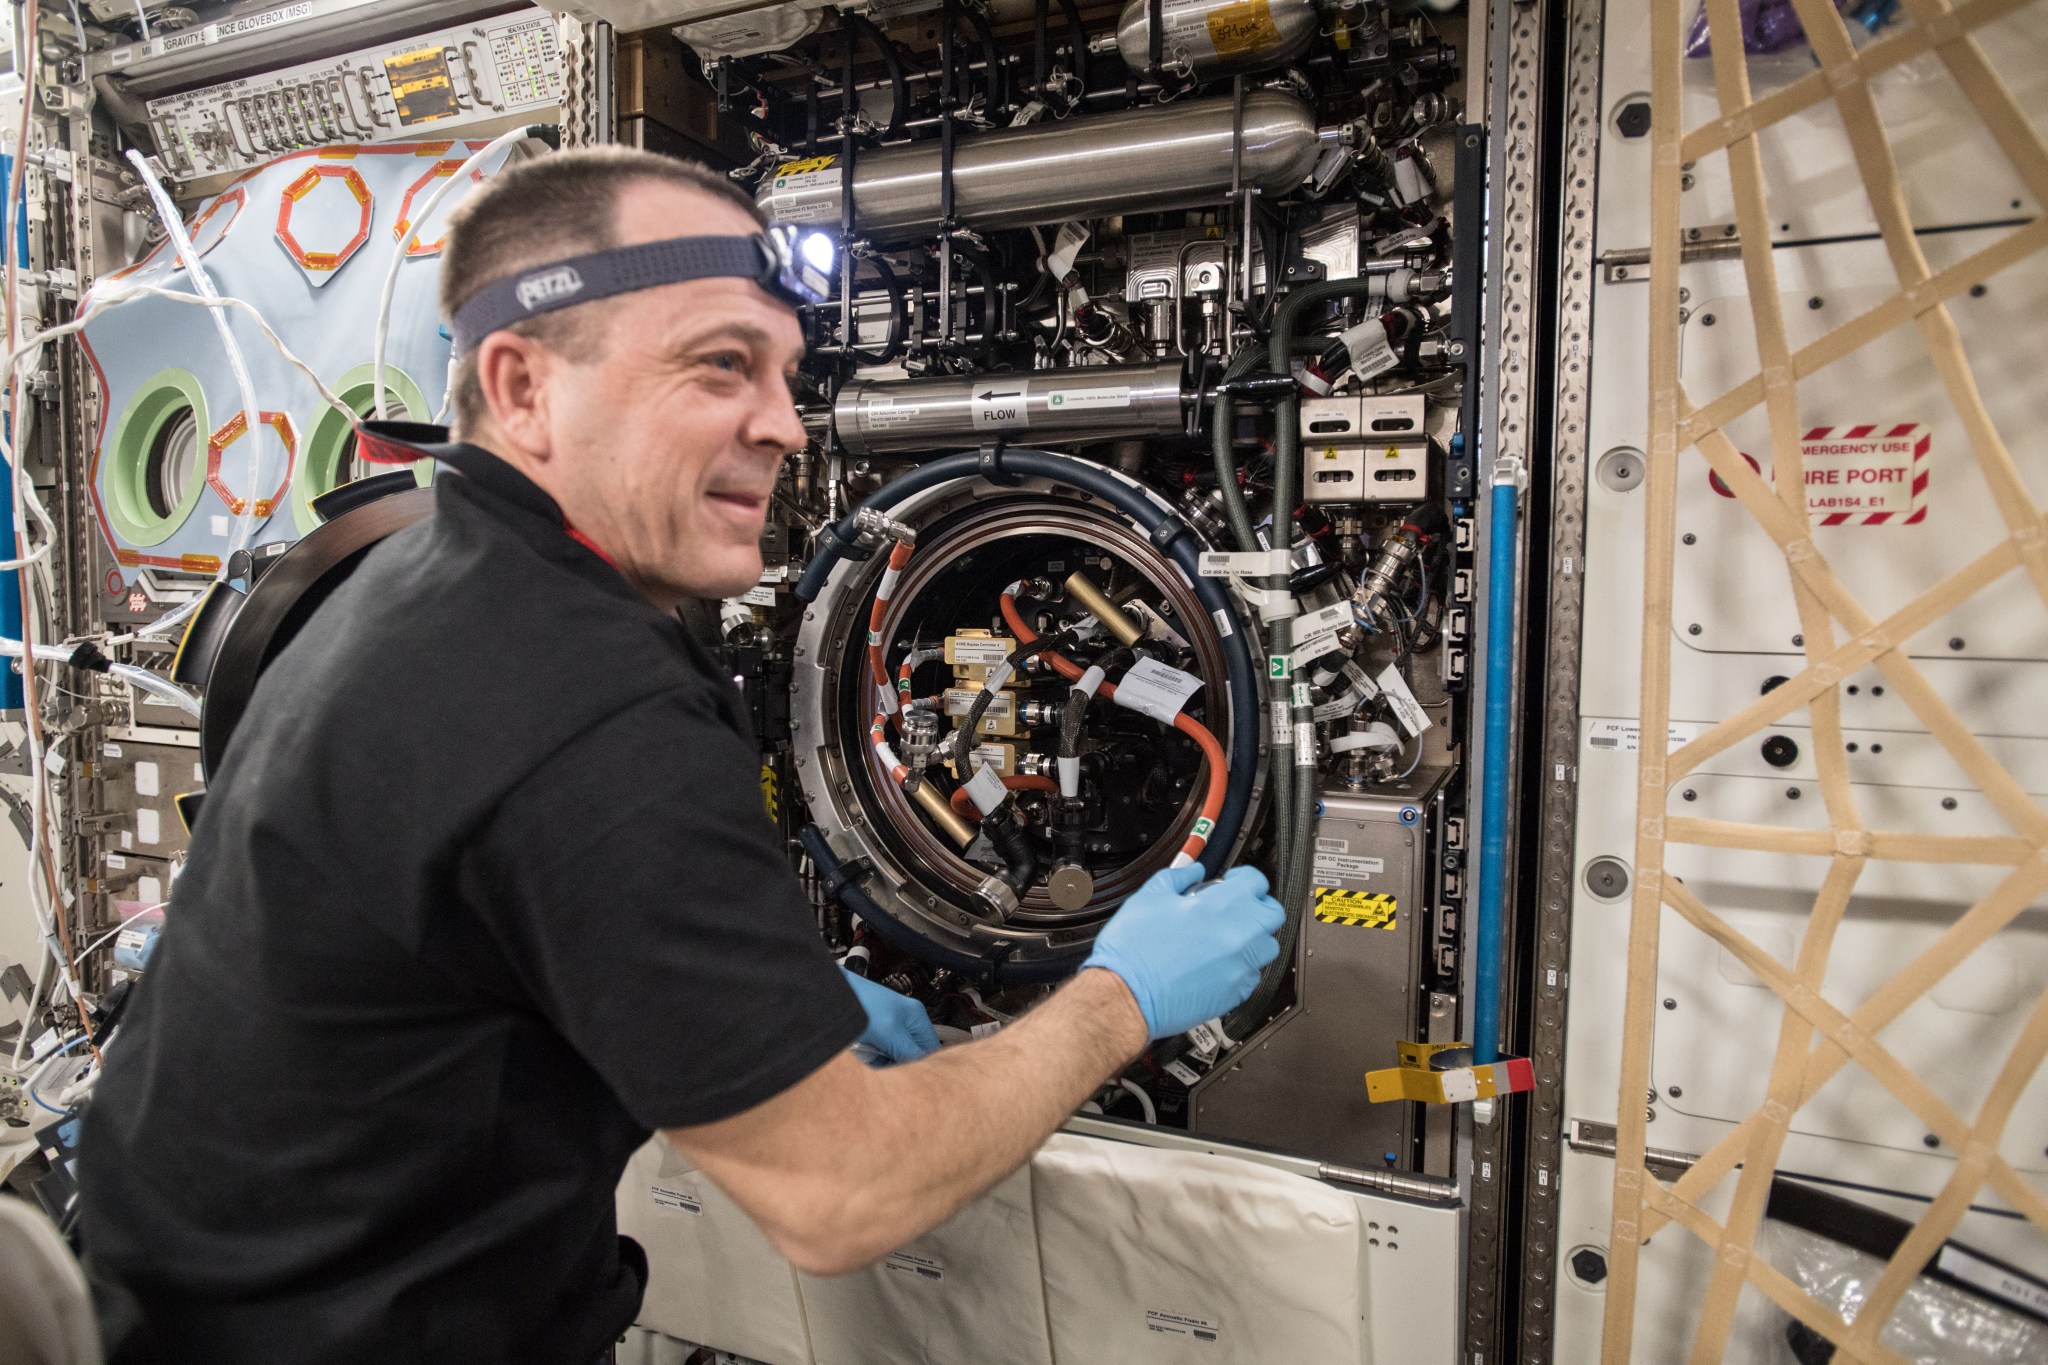 NASA Expedition 56 astronaut Ricky Arnold is pictured here troubleshooting the Combustion Integrated Rack aboard the ISS.